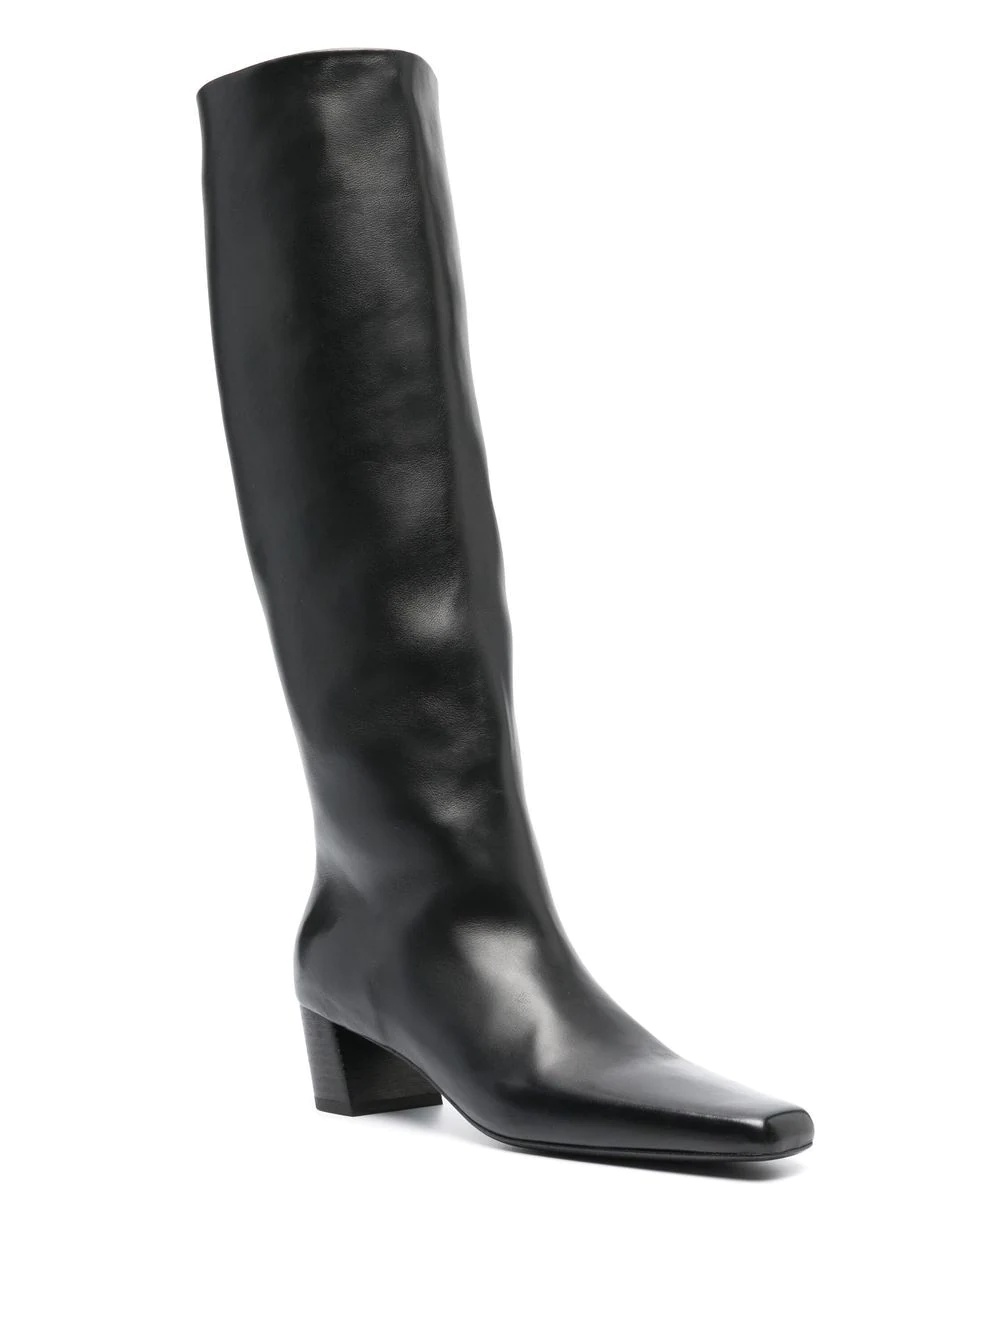 heeled 65mm leather boots - 2